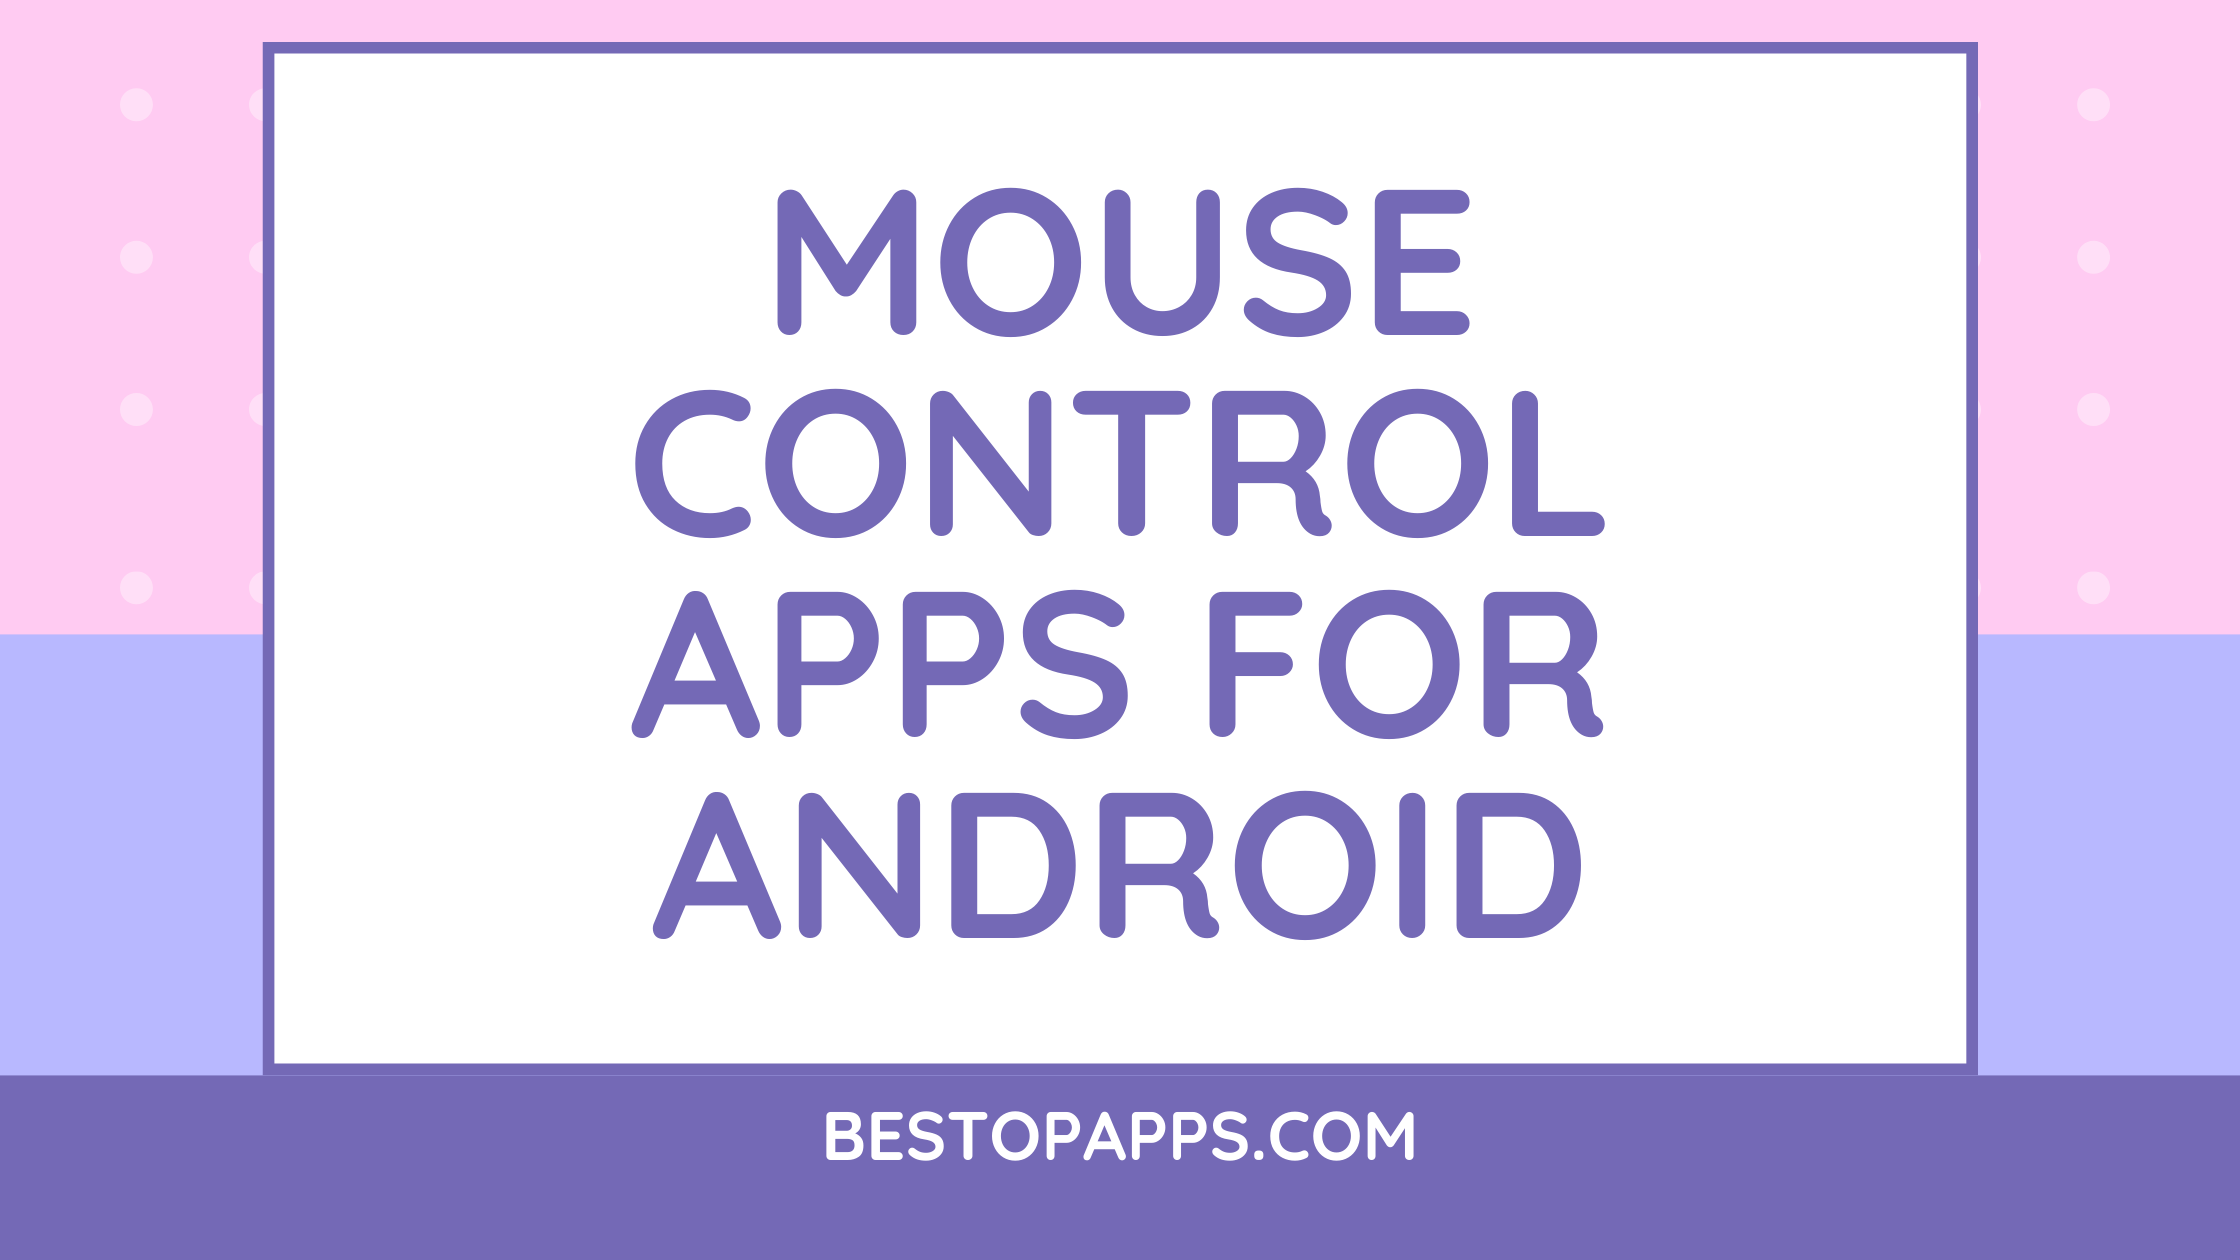 Mouse Control Apps for Android